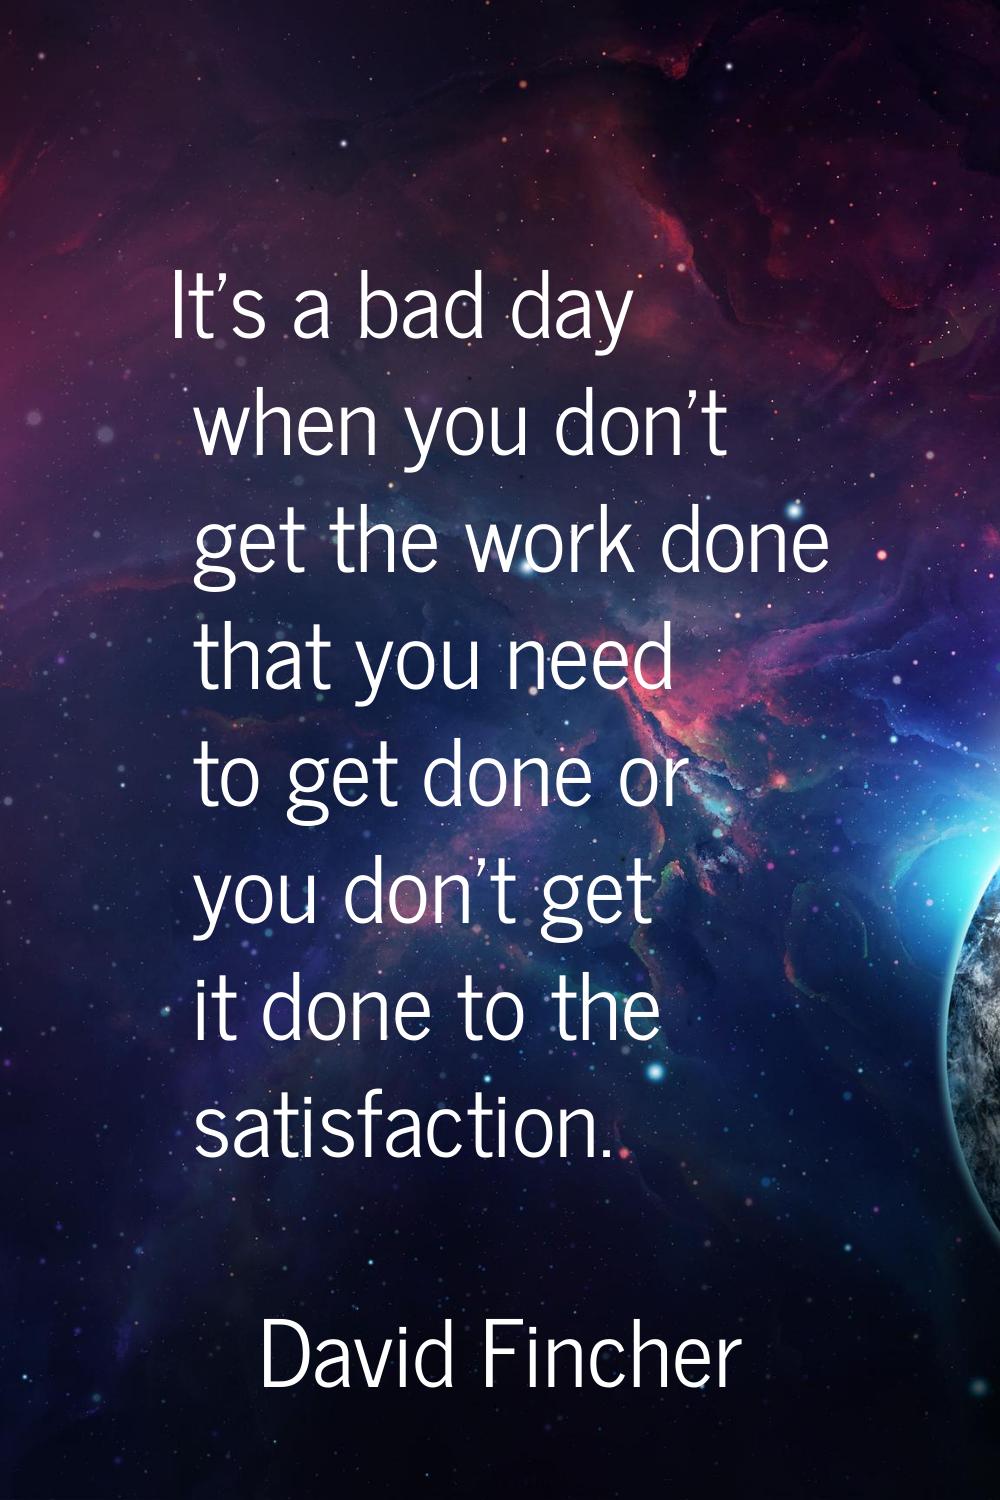 It's a bad day when you don't get the work done that you need to get done or you don't get it done 